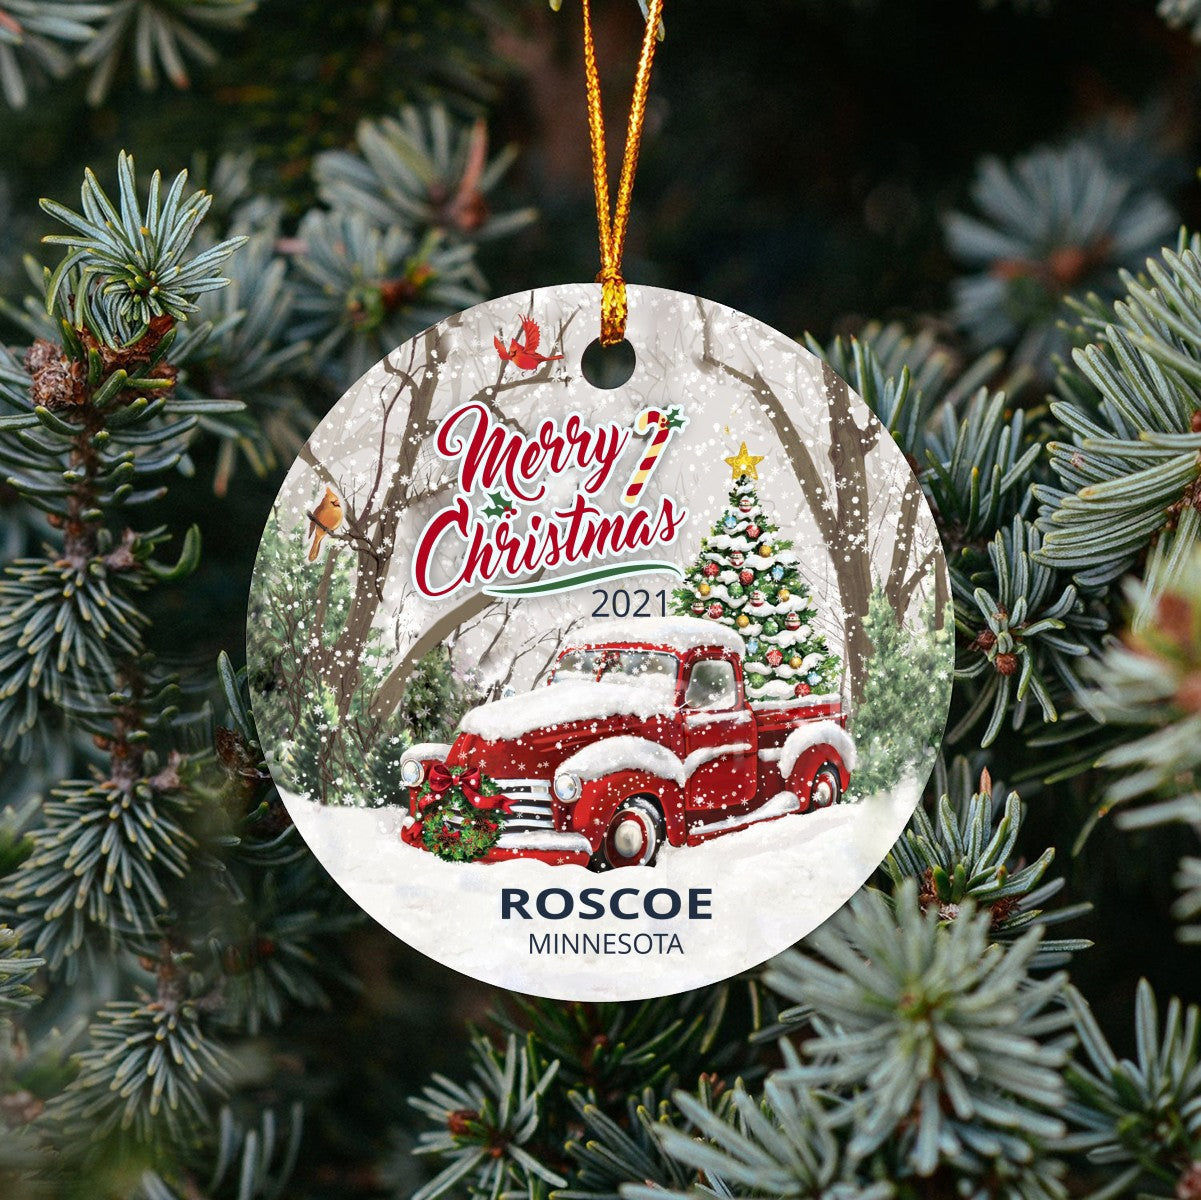 Christmas Tree Ornaments Roscoe - Ornament With Name City, State Roscoe Minnesota MN Ornament - Red Truck Xmas Ornaments 3'' Plastic Gift For Family, Friend And Housewarming